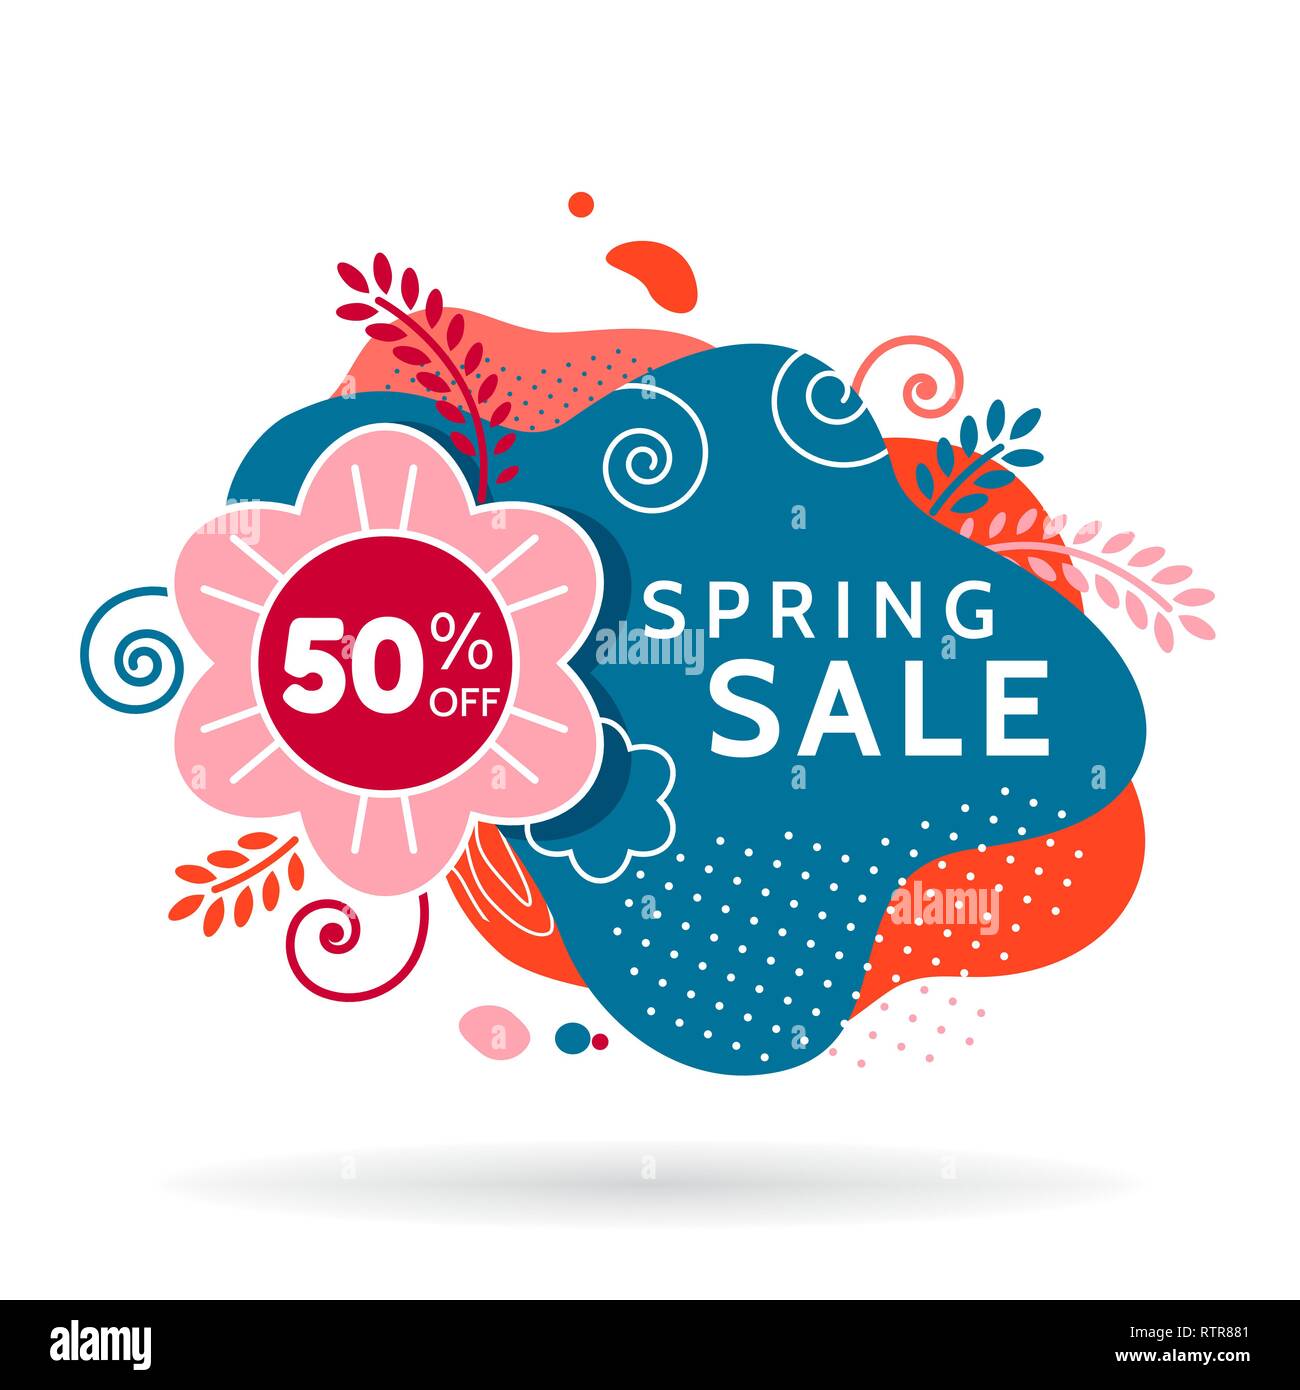 Spring sale banner, invitation poster, colorful advertising flyer Stock Vector